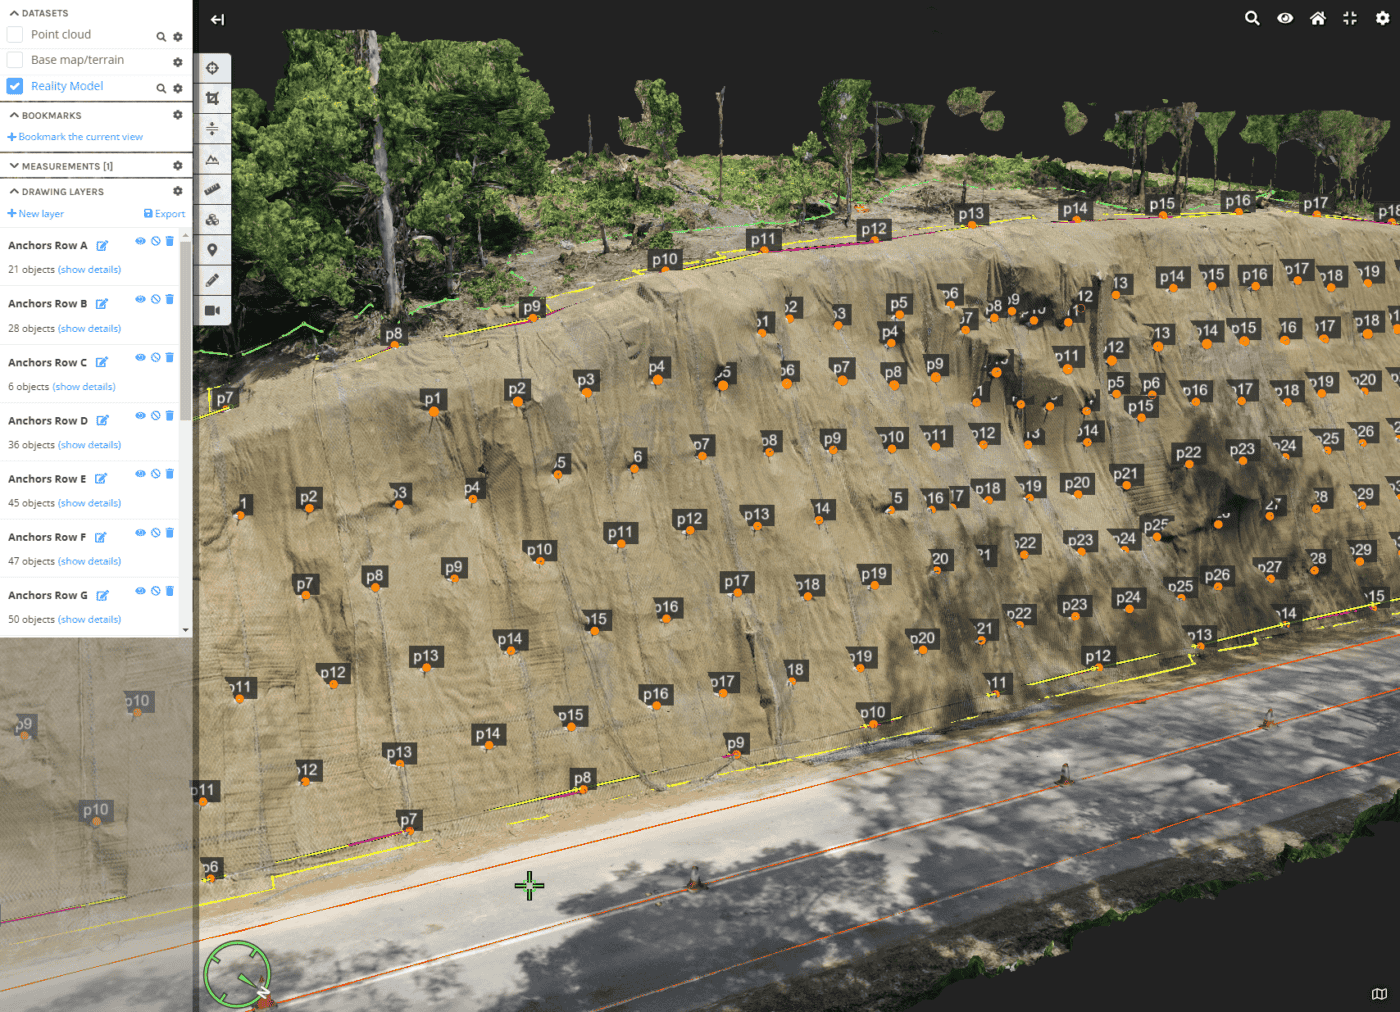 As-built surveys using drones to produce 3D reality model and extract features and 2D drawings